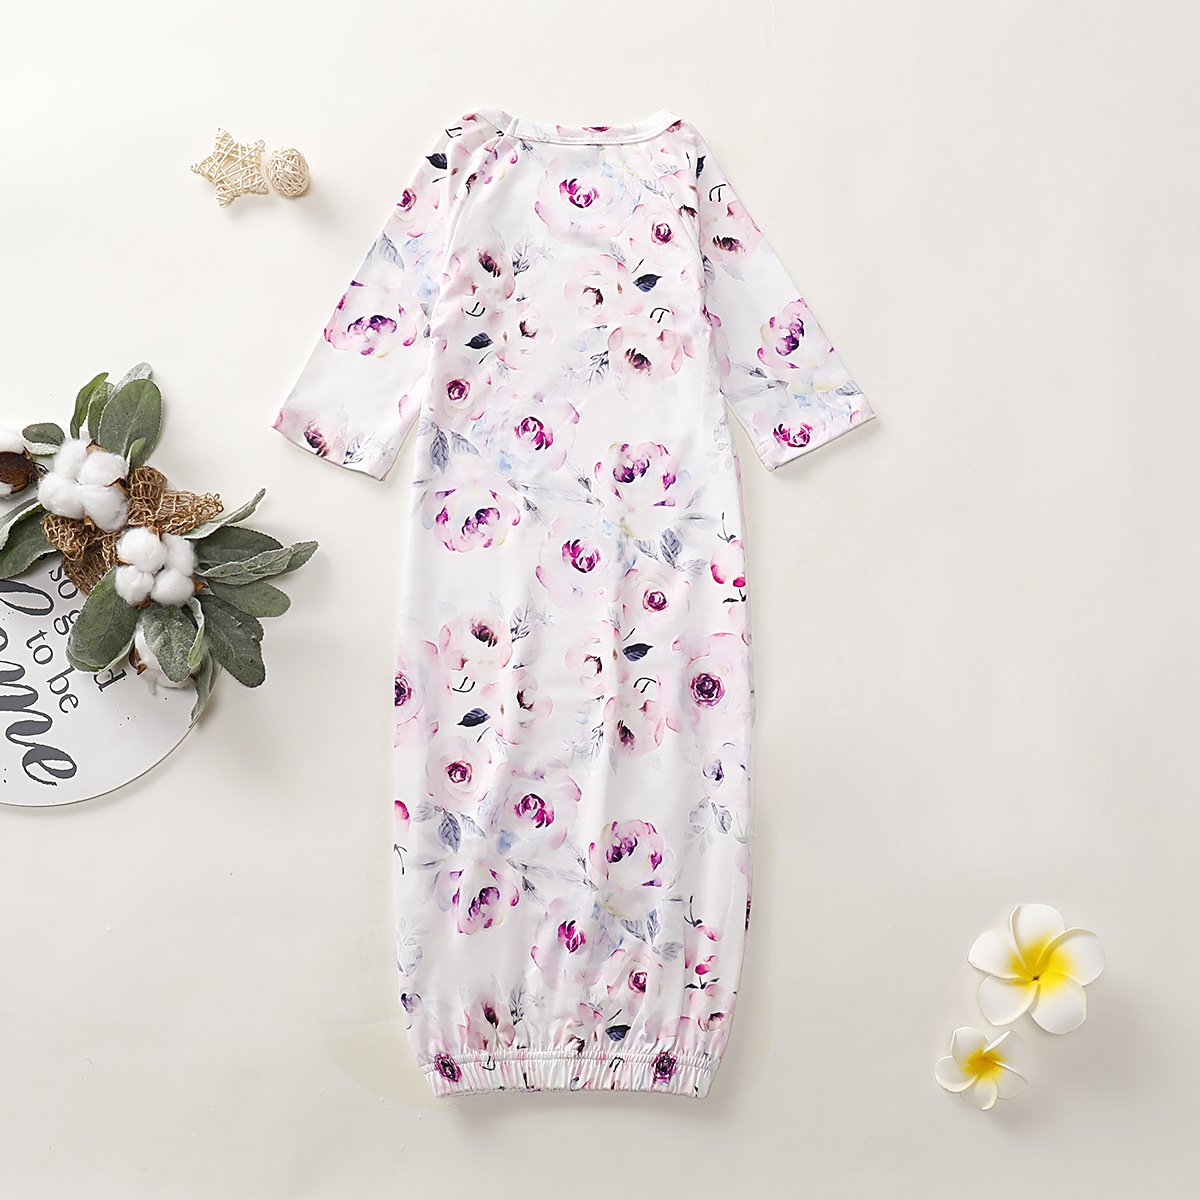 2PCS Lovely Floral Printed Baby Sleeping Bag